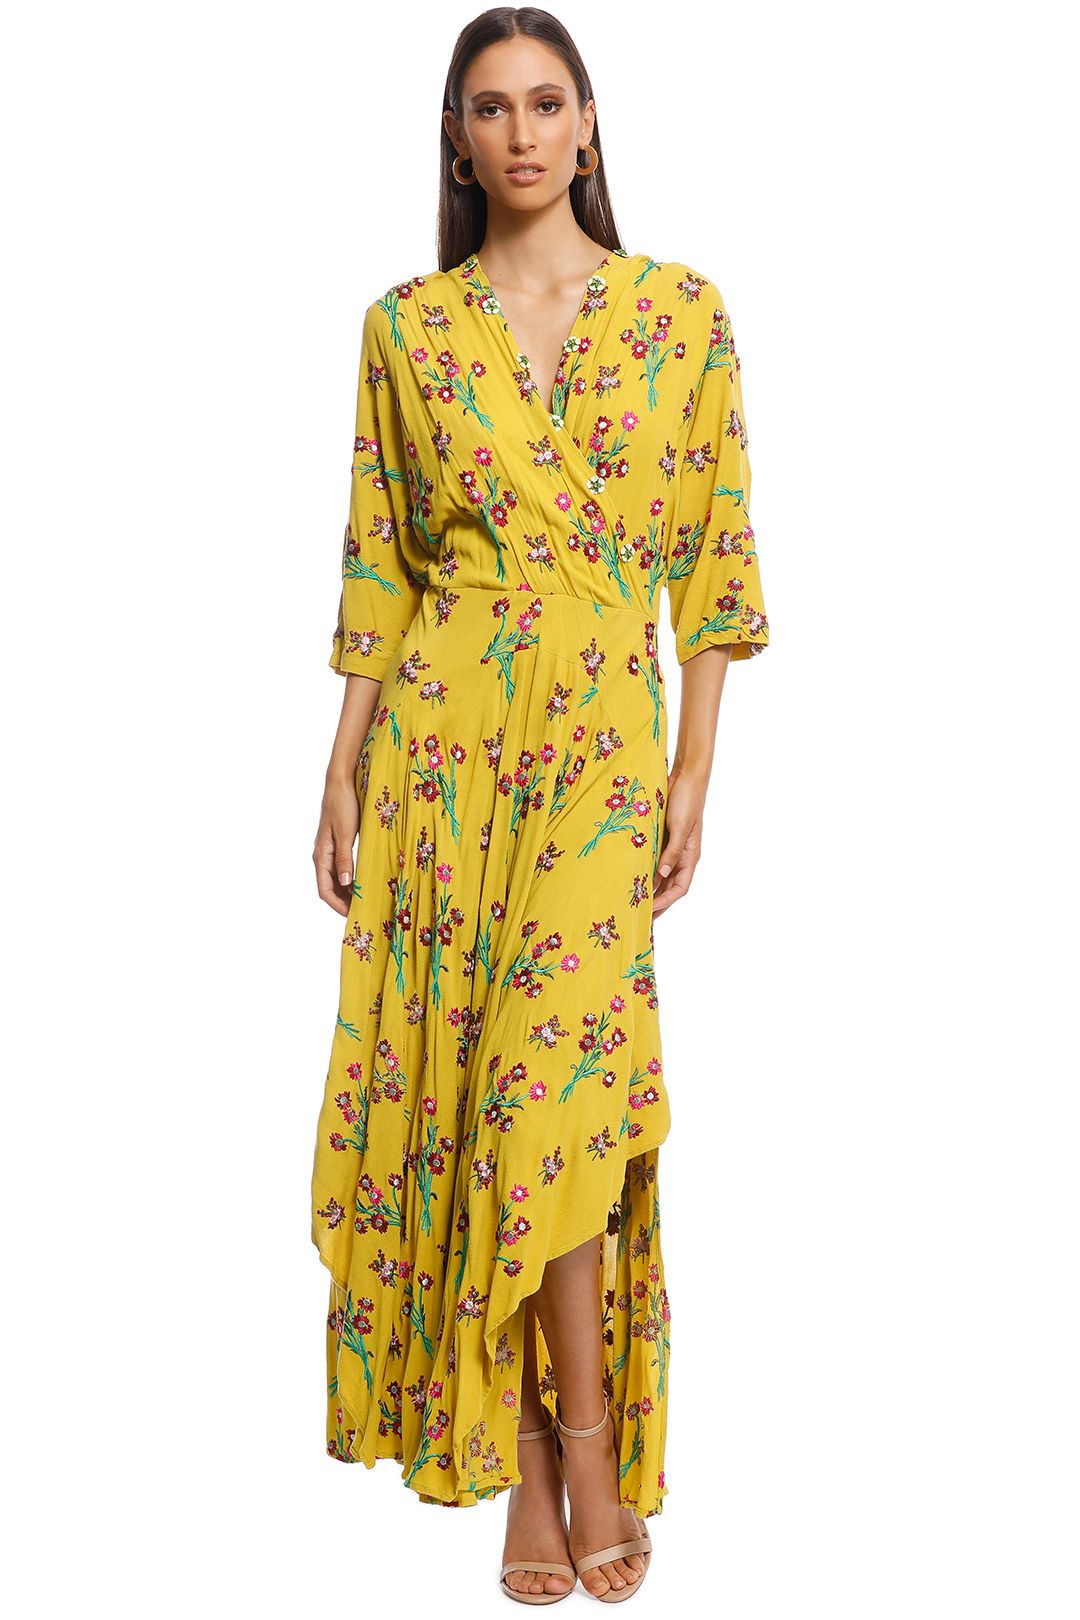 Trelise Cooper - Eat Drink Be Maxi Dress - Yellow - Front